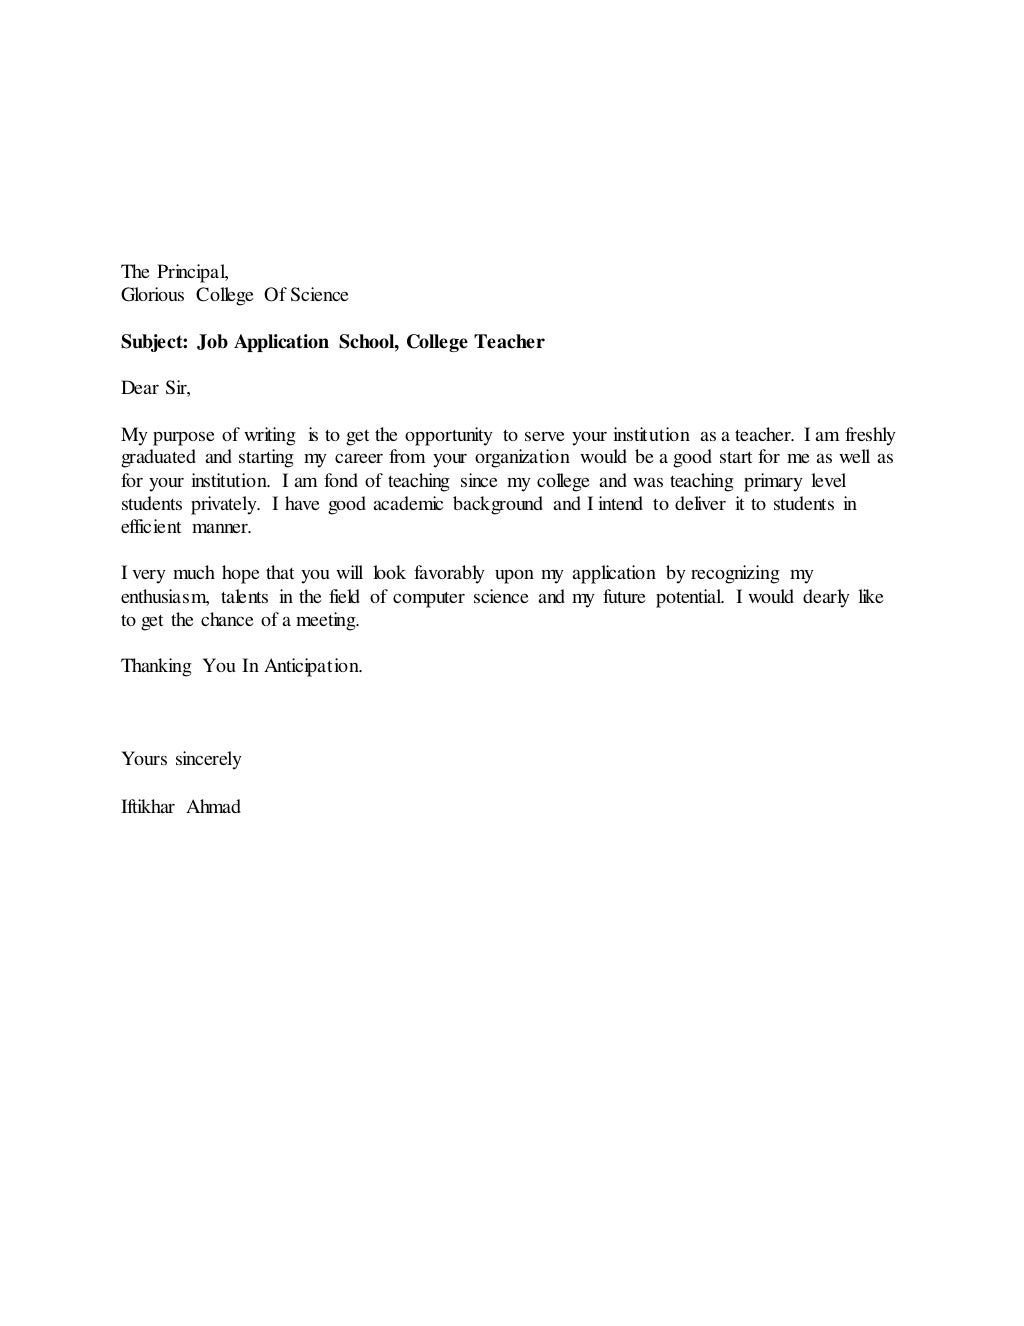 job seeking cover letter examples